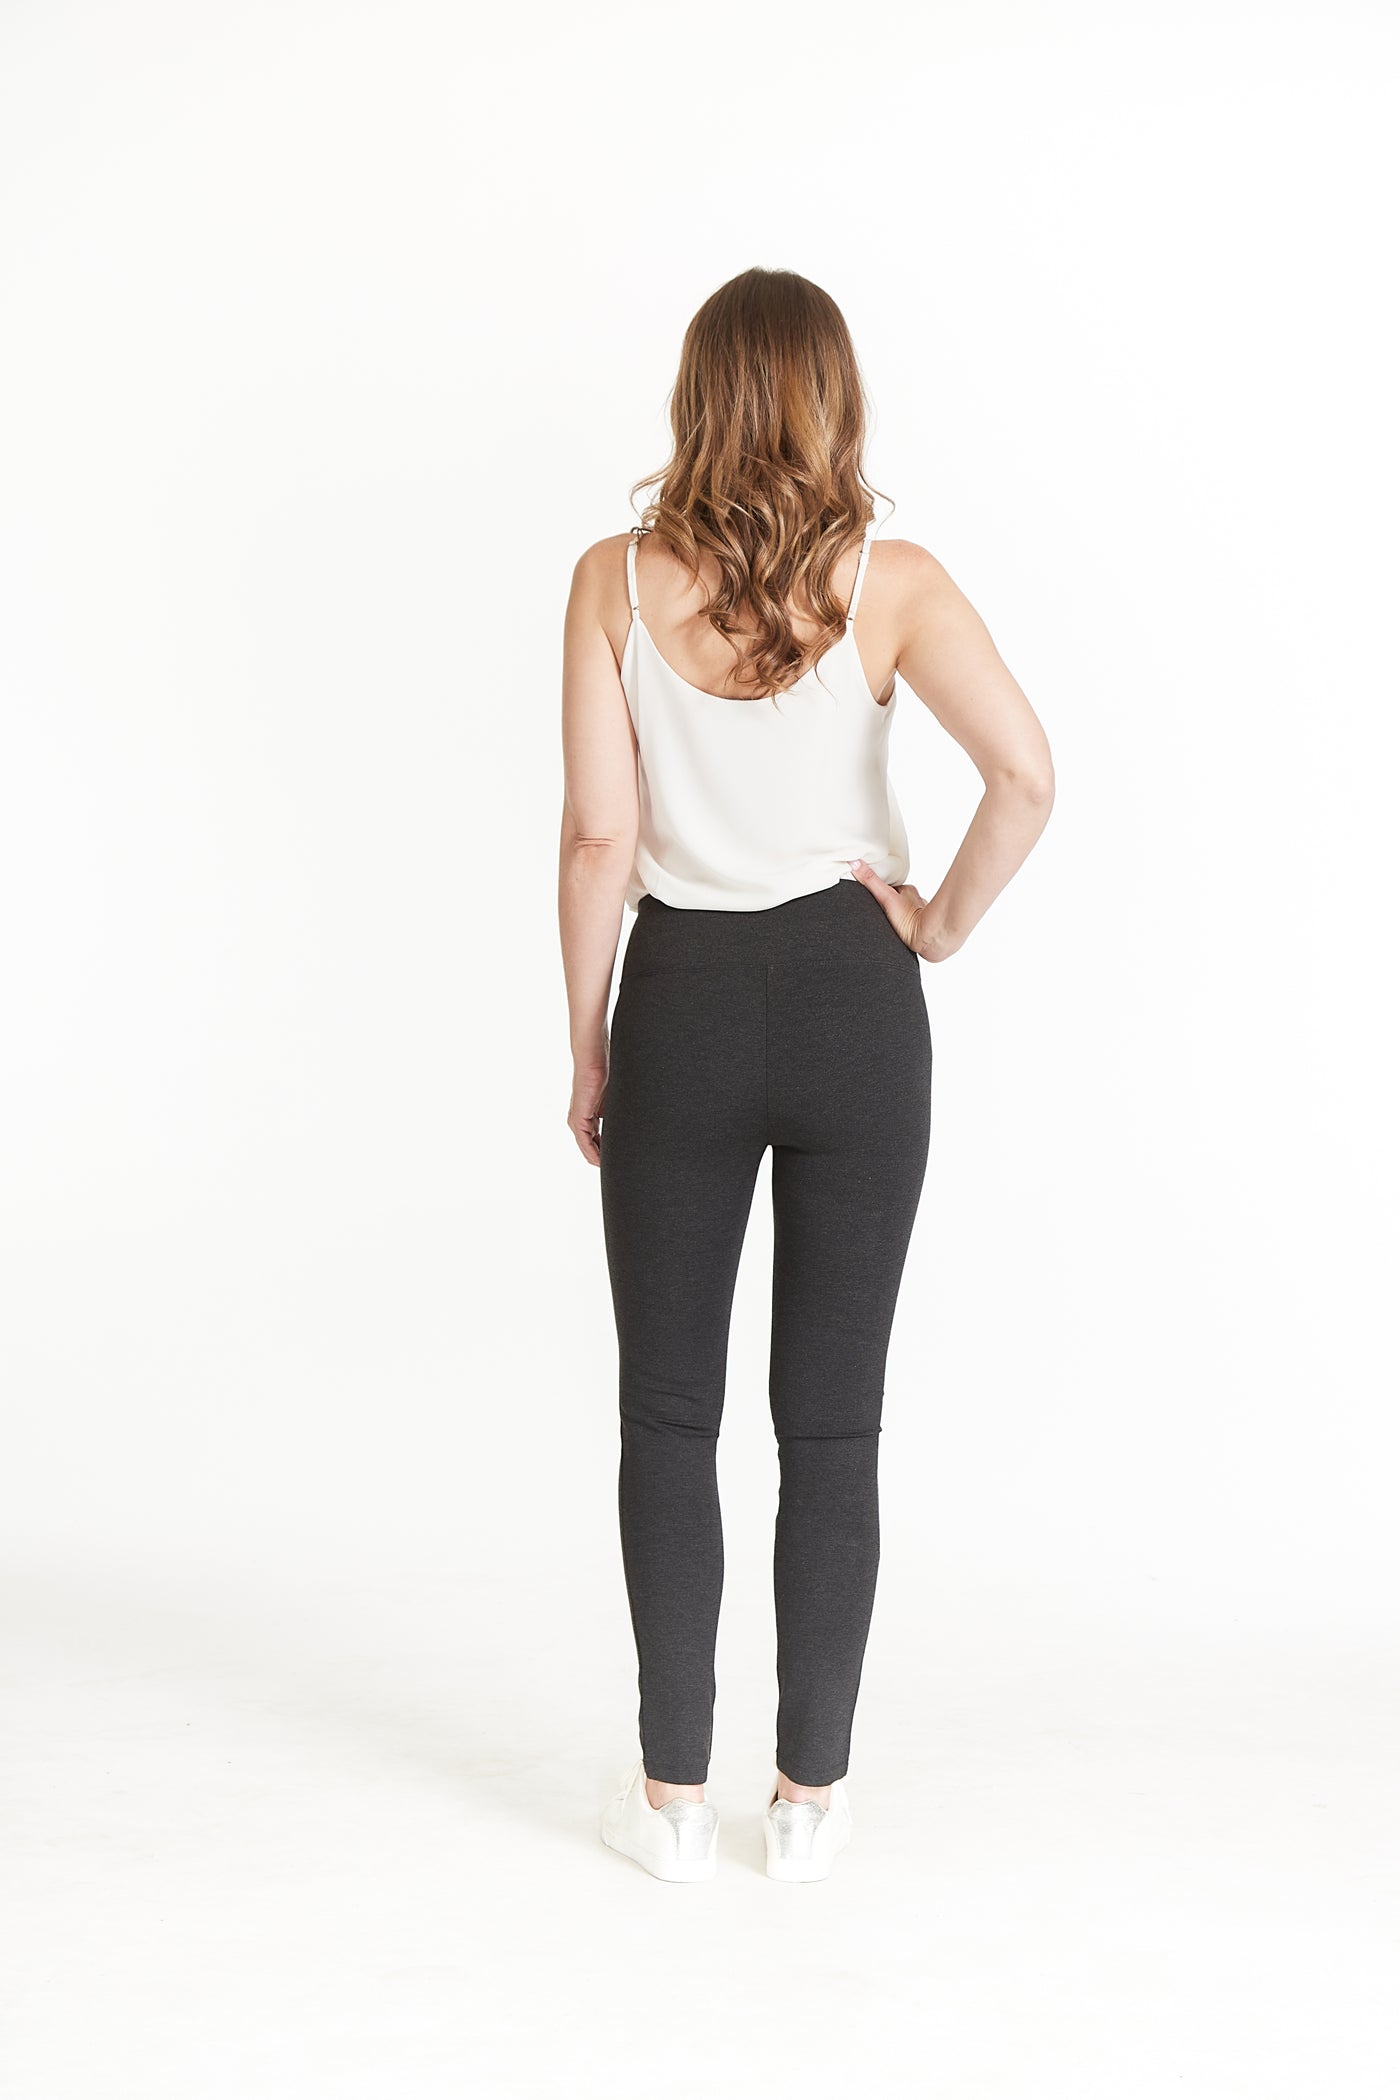 WIDE BAND PULL-ON ANKLE LEGGING - Heather Grey